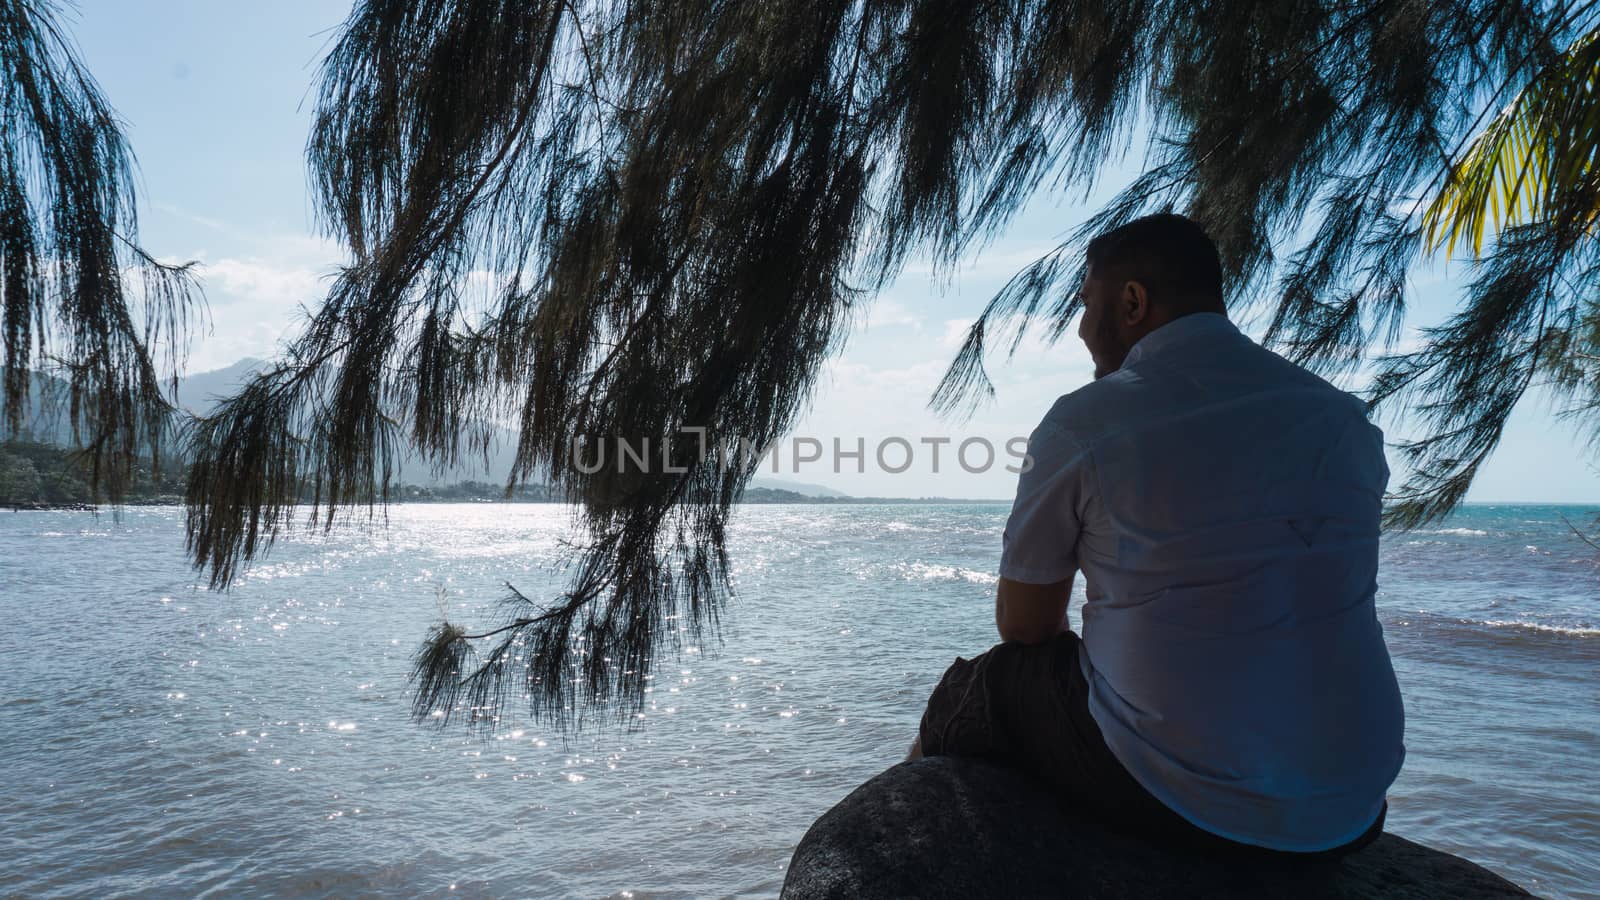 Along man sitting on a rock relaxing and reflexion with a beautiful blue sky and sea by henrry08